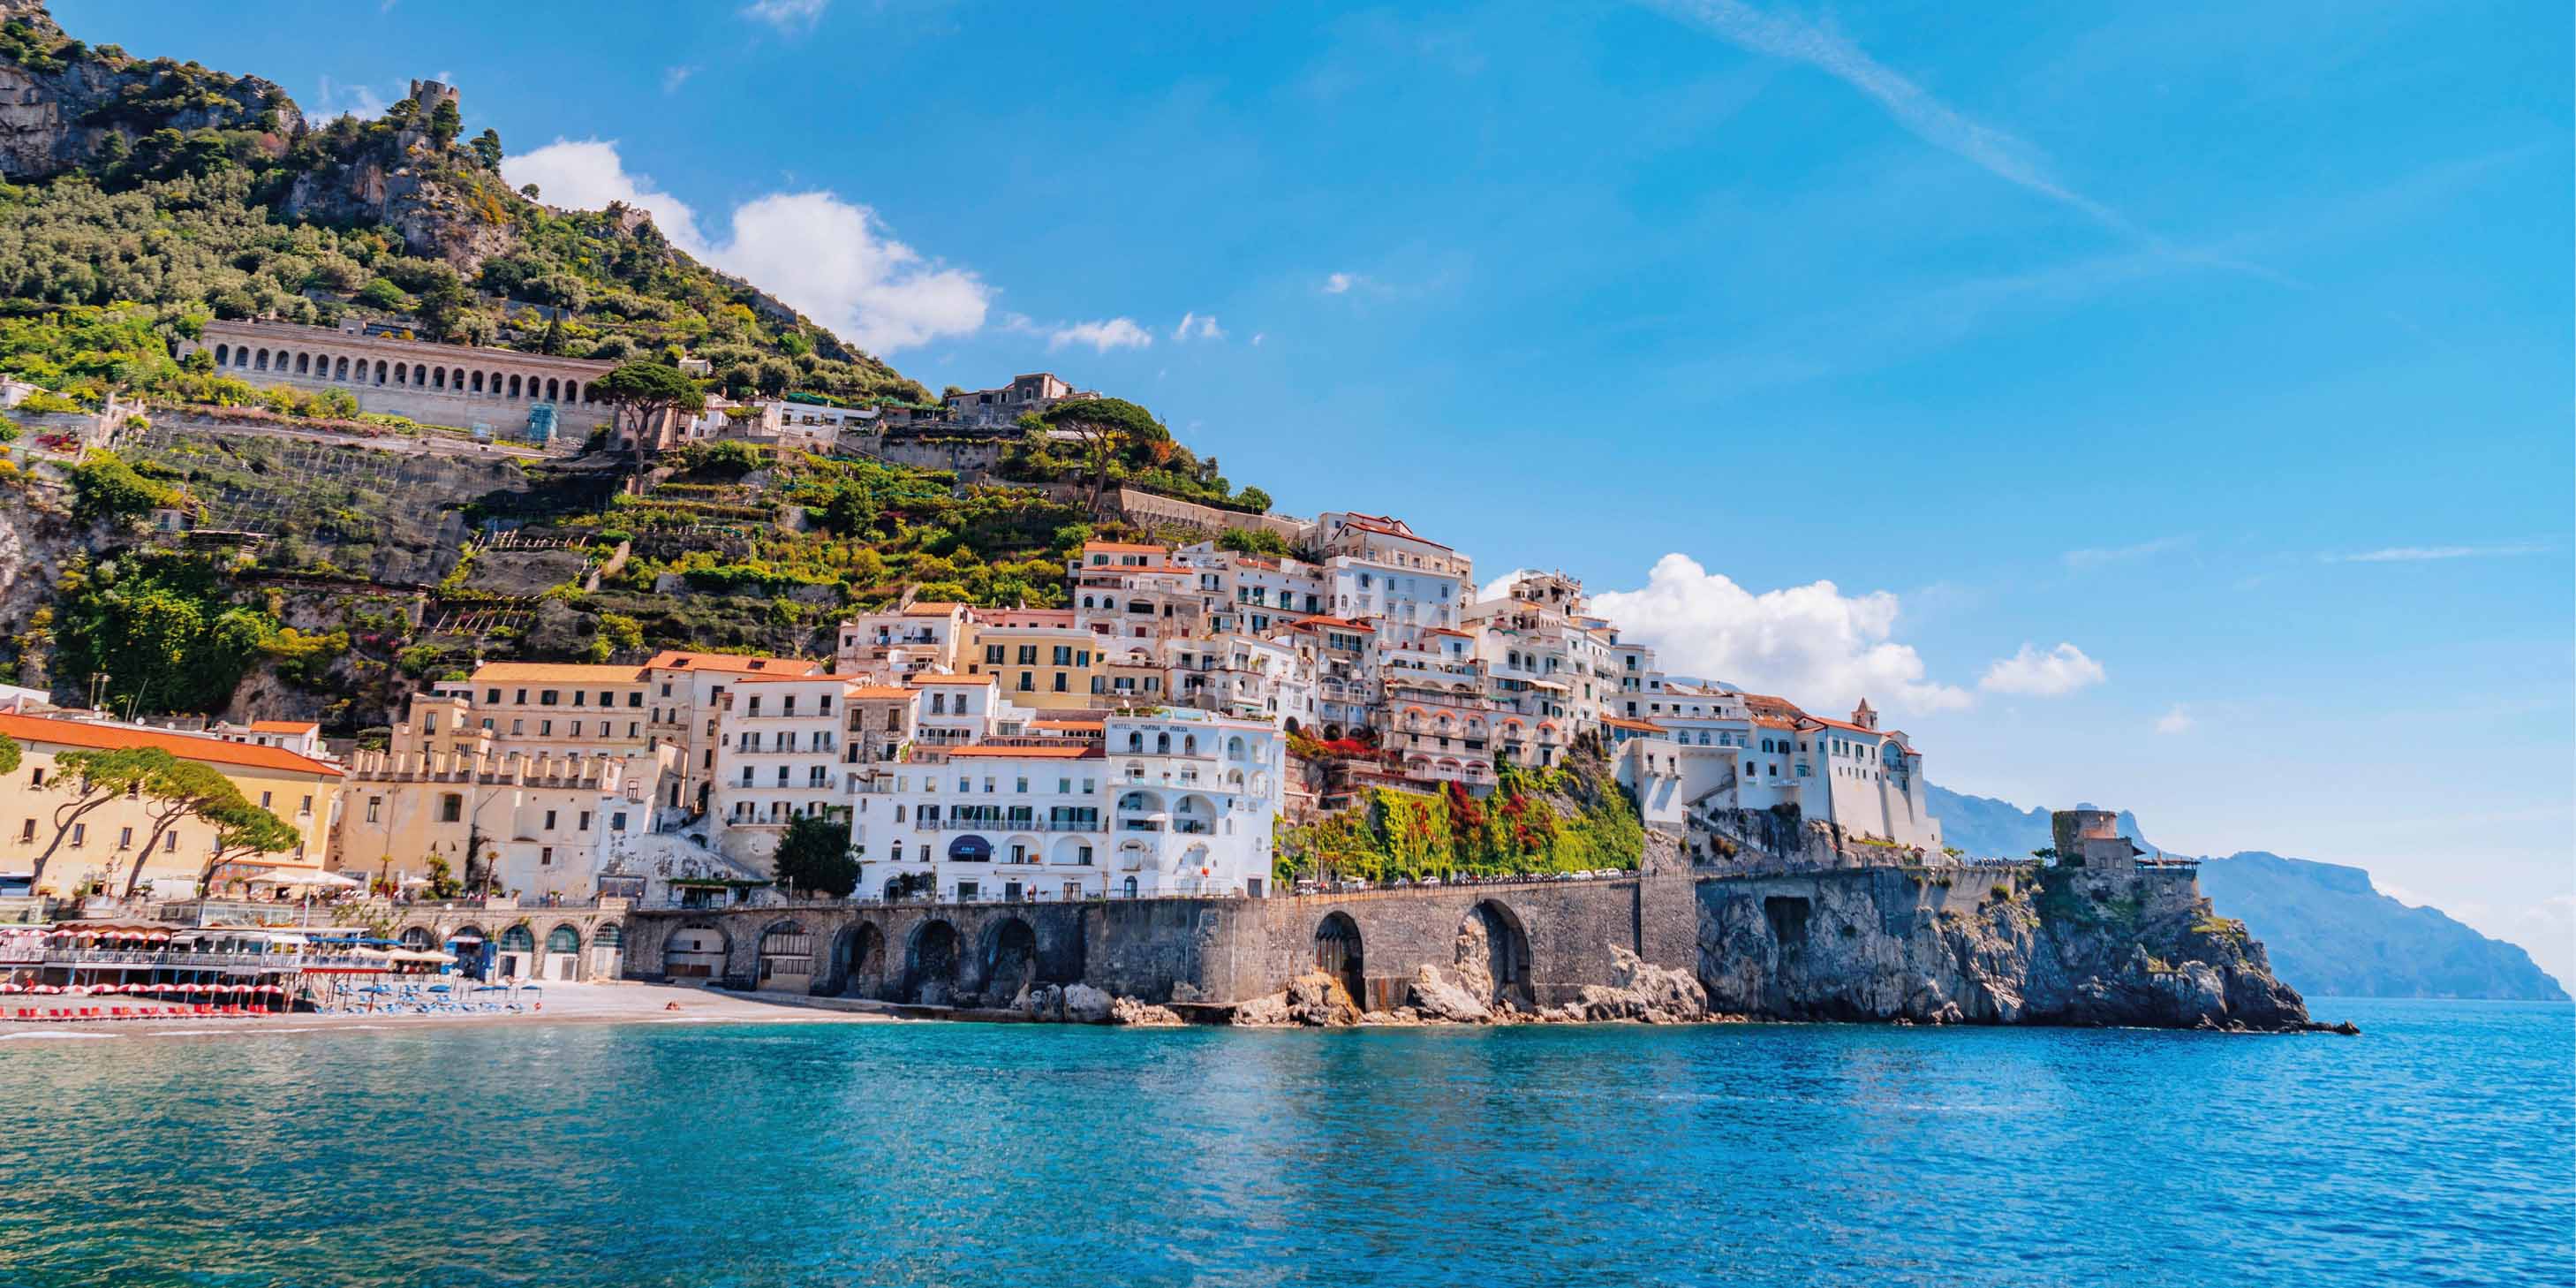 Stunning traditional buildings on the edge of the hill at the Amalfi Coast